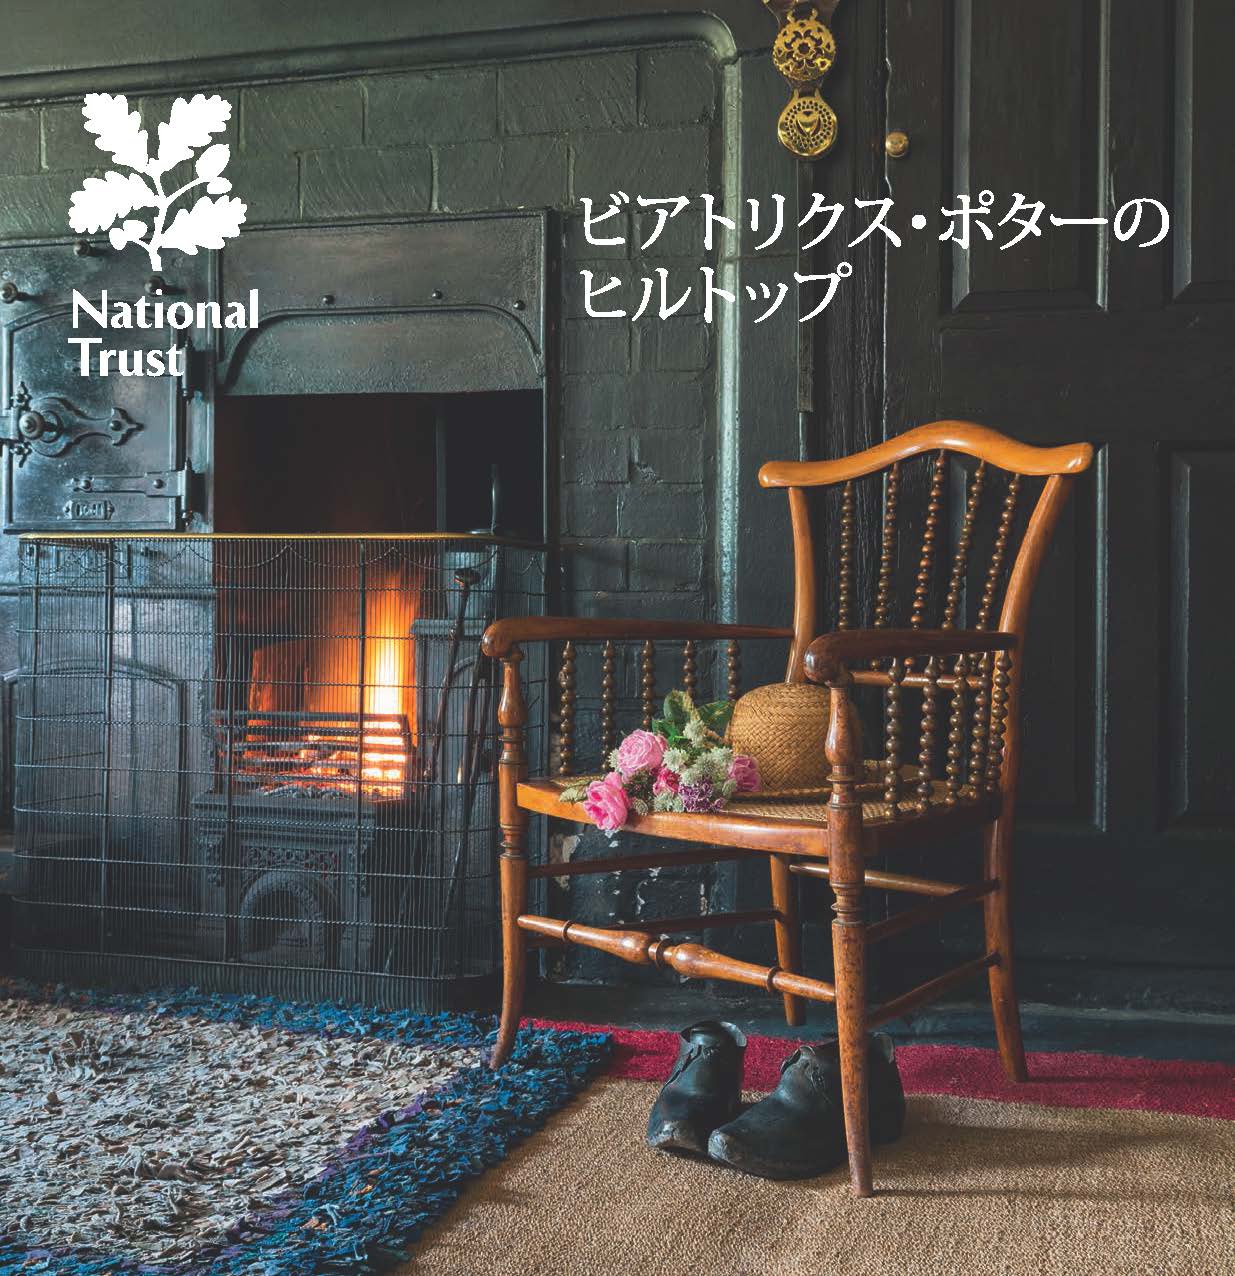 An image of National Trust Beatrix Potter's Lake District Guidebook - Japanese